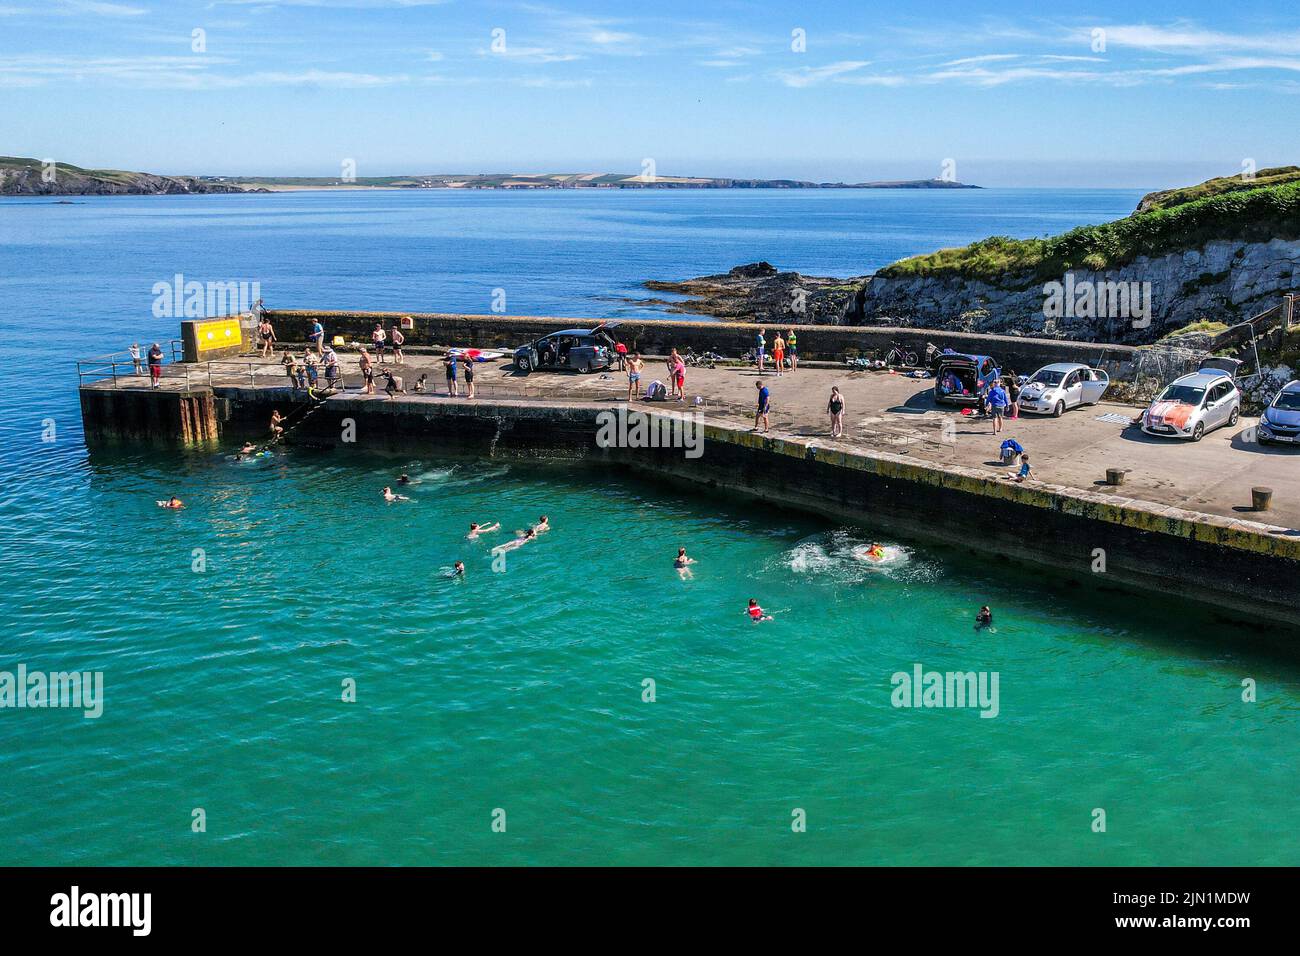 Rosscarbery, West Cork, Ireland. 8th Aug, 2022. Rosscarbery Pier was very busy today with people taking a dip and jumping into the water to cool off on a day with temperatures hitting 21C. Credit: AG News/Alamy Live News Stock Photo